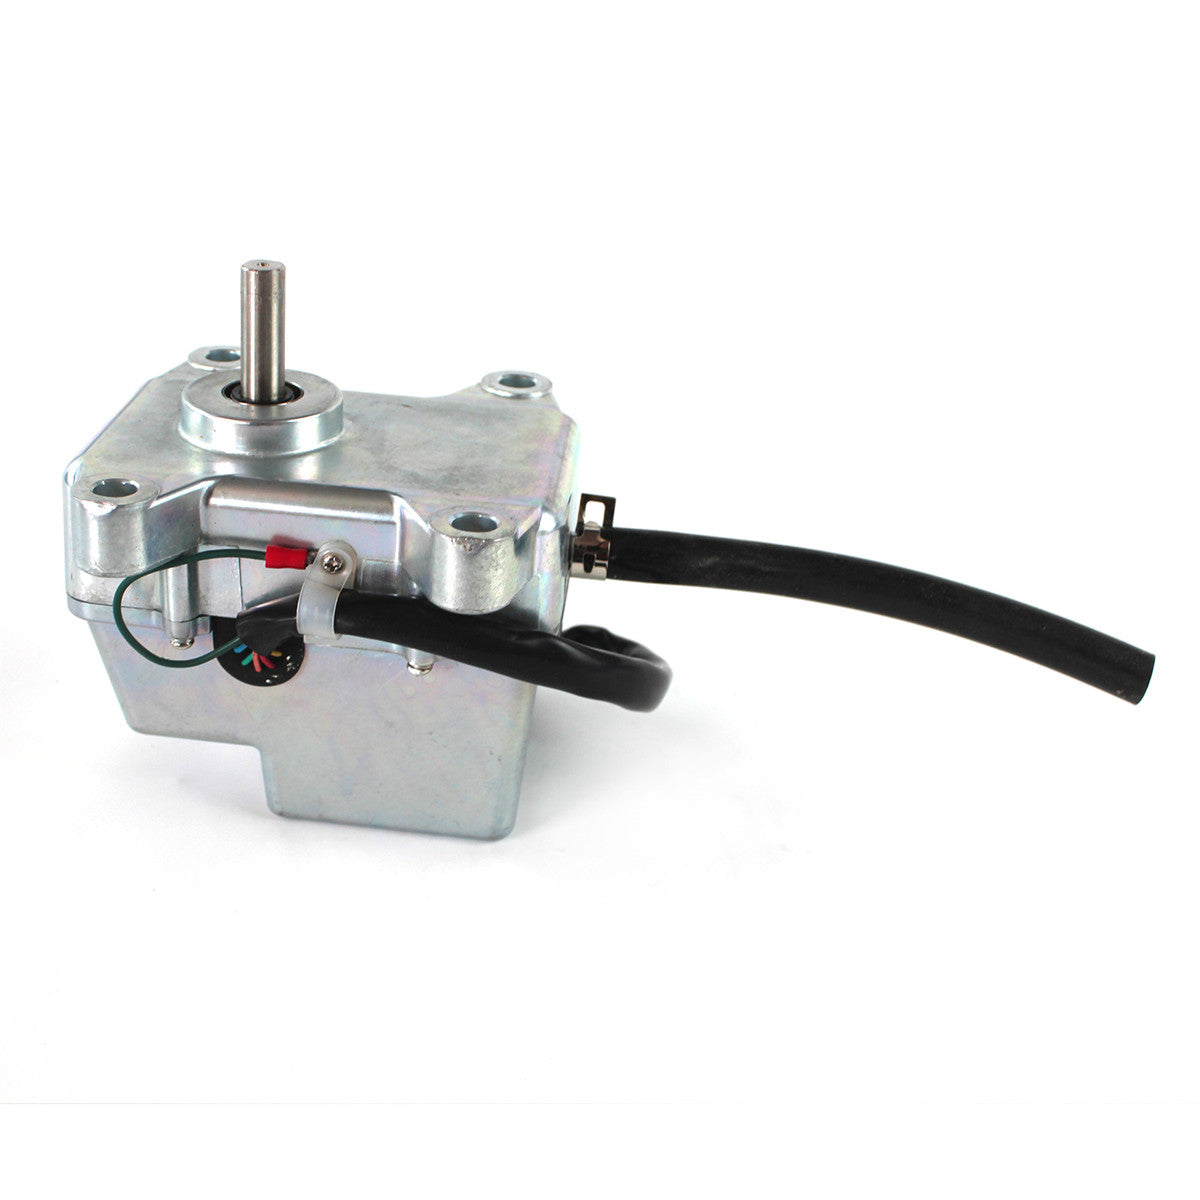 KHR1346 Throttle Motor with 12 Pins for Sumitomo Excavator SH100-A1 SH100-A2 - Sinocmp